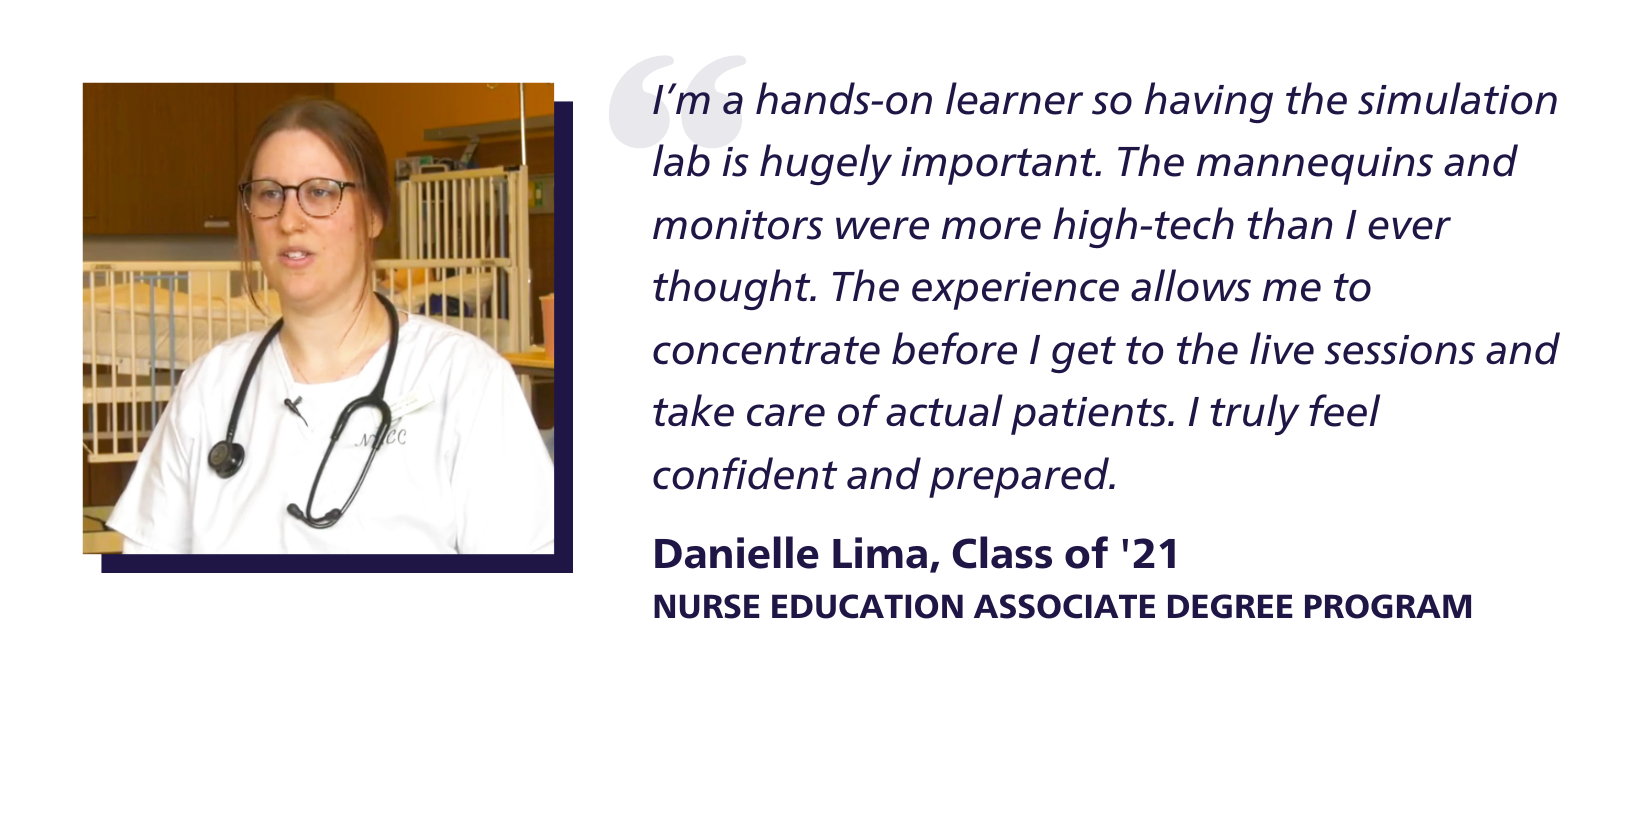 Quote: I’m a hands-on learner so having the simulation lab is hugely important. The mannequins and monitors were more high-tech than I ever thought. The experience allows me to concentrate before I get to the live sessions and take care of actual patients. I truly feel confident and prepared. Danielle Lima, Class of '21, Nurse Education Associate Degree Program